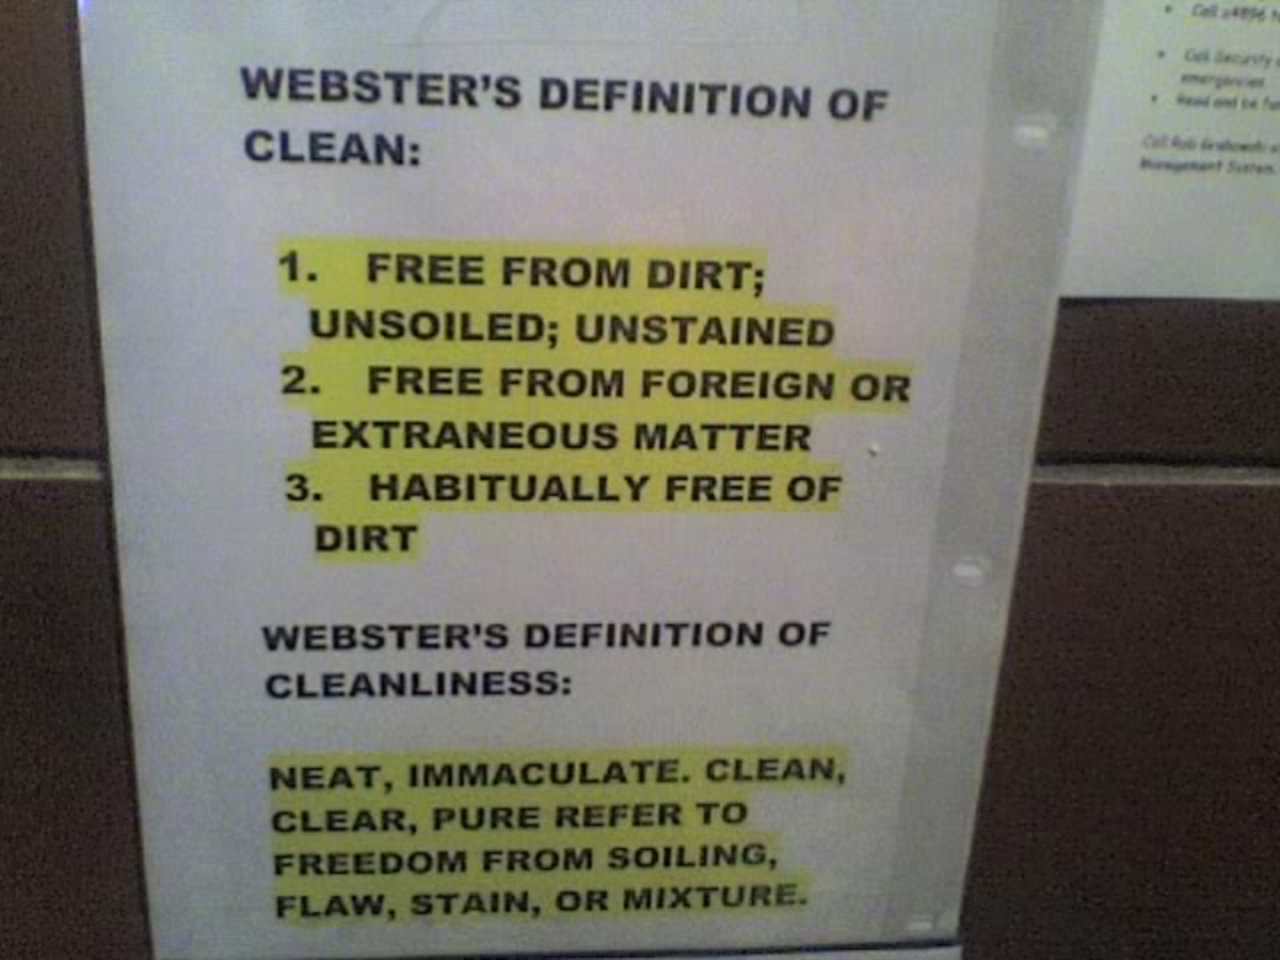 WEBSTER'S DEFINITION OF CLEAN: 1. Free from dirt; unsoiled; unstained 2. Free from foreign or extraneous matter 3. Habitually free of dirt WEBSTER'S DEFINITION OF CLEANLINESS: Neat, immaculate, clean, clear, pure refer to freedom from soiling, flaw, stain or mixture